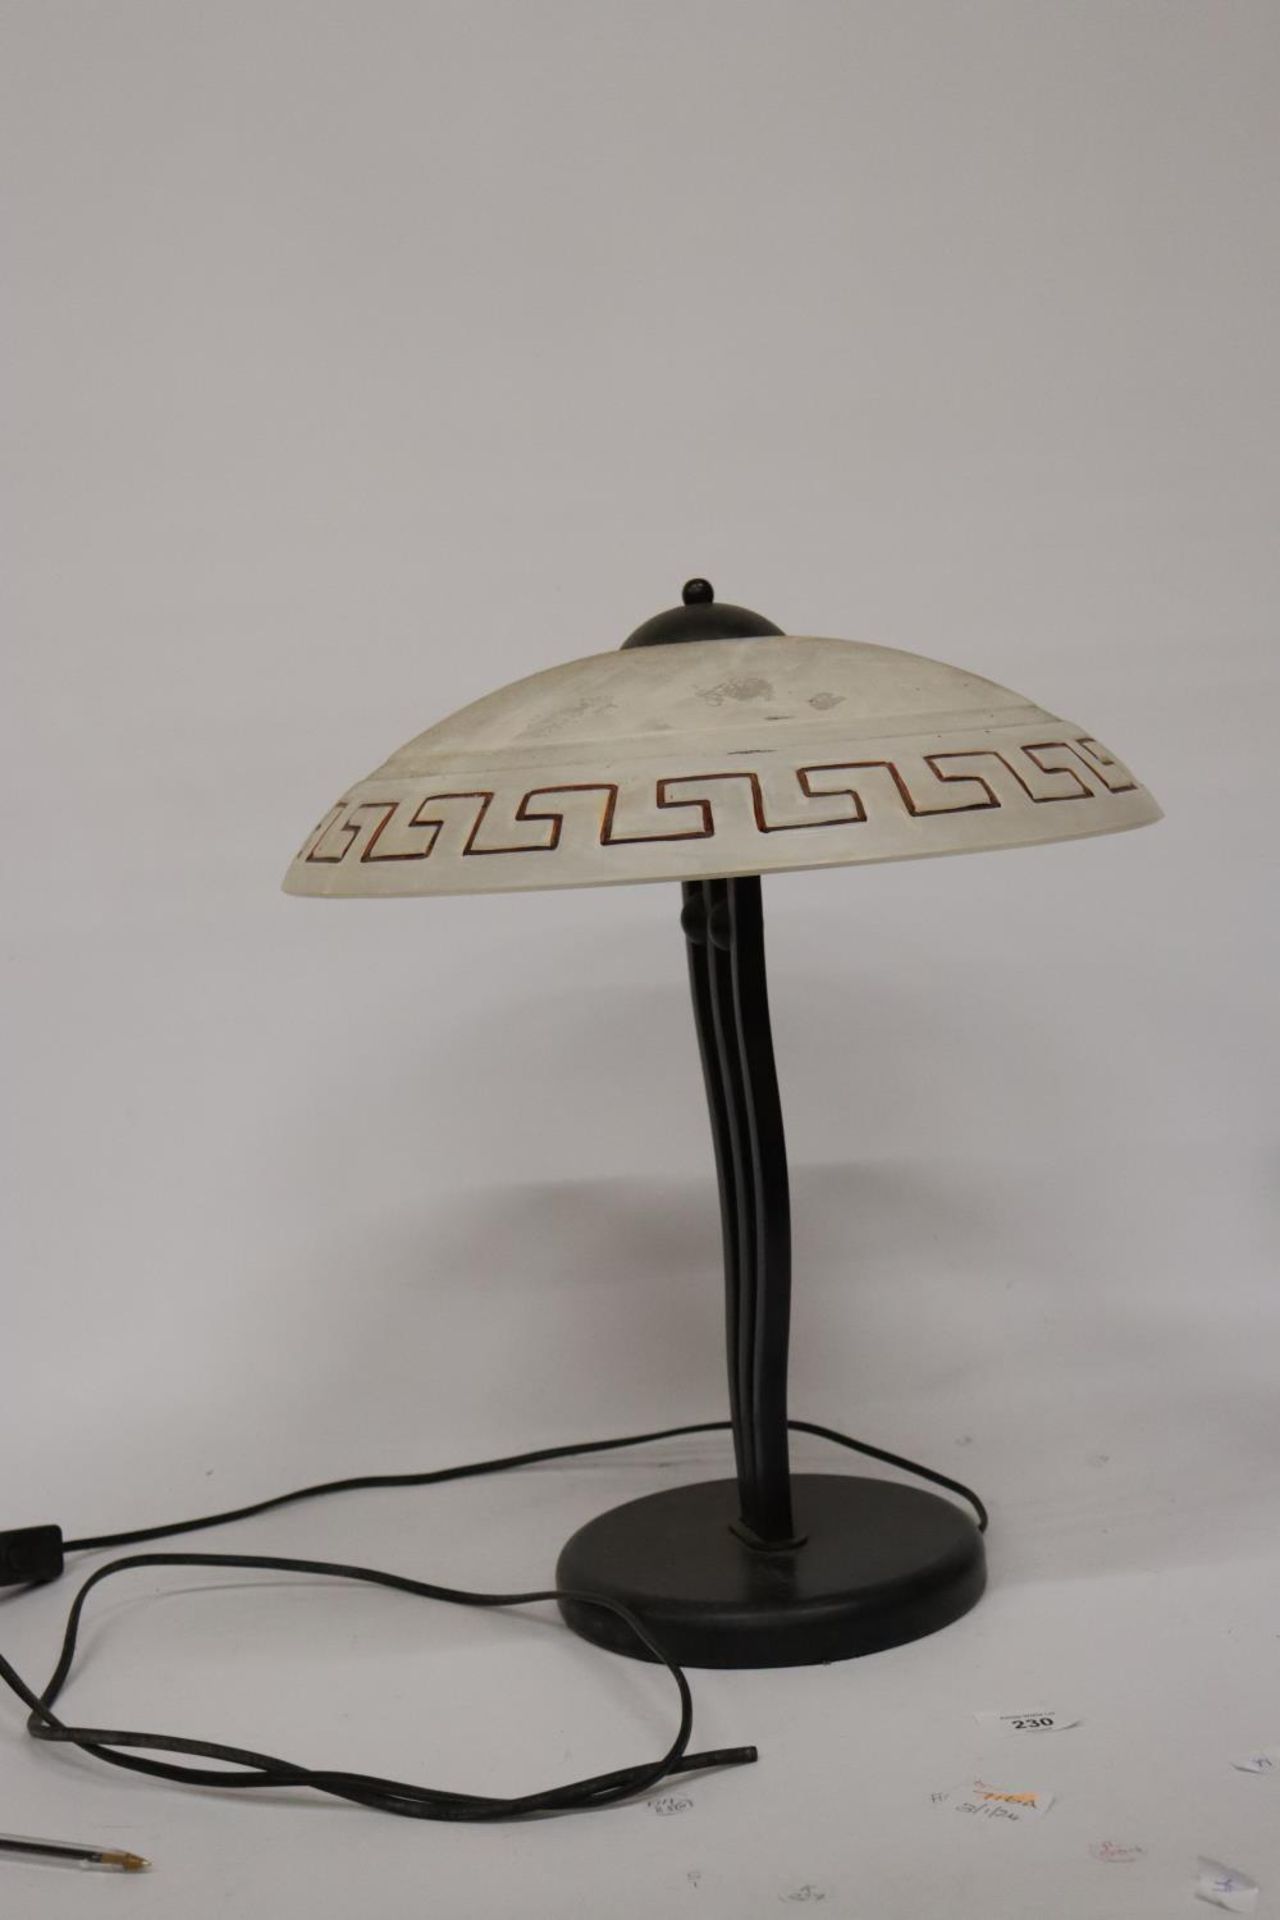 A HEAVY VINTAGE STYLE TABLE LAMP WITH METAL BASE AND GLASS SHADE, HEIGHT APPROX 42CM - Image 4 of 5